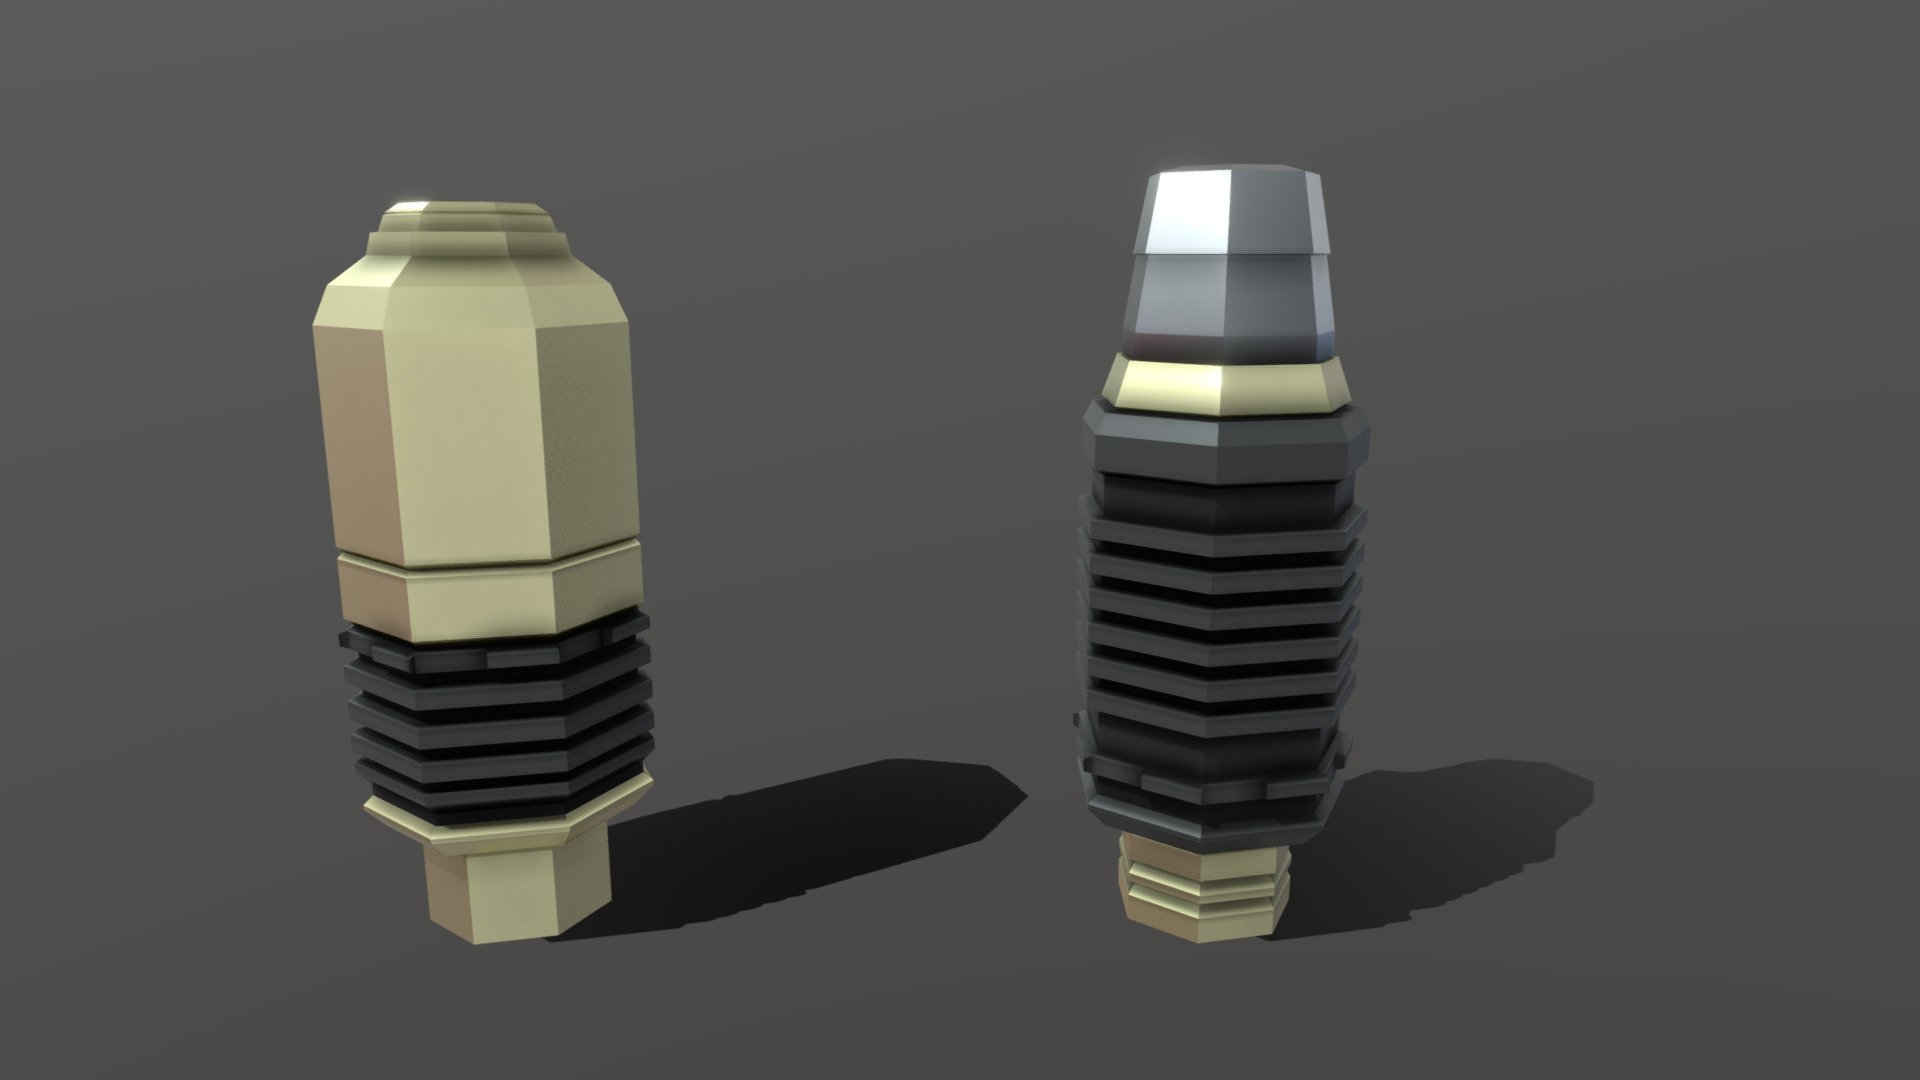 Low-Poly models of the VOG-25 and VOG-25P, both rounds designed for use in grenade launchers such as the GP-25. They have a maximum range of a little over 400m, with a launch velocity of about 76.5m/s.

The VOG-25 explodes on impact with a kill radius of six meters.
The VOG-25P is a bouncing grenade, with a small charge in the front detonating upon impact and causing it to jump about one meter upwards and then detonate 3d model